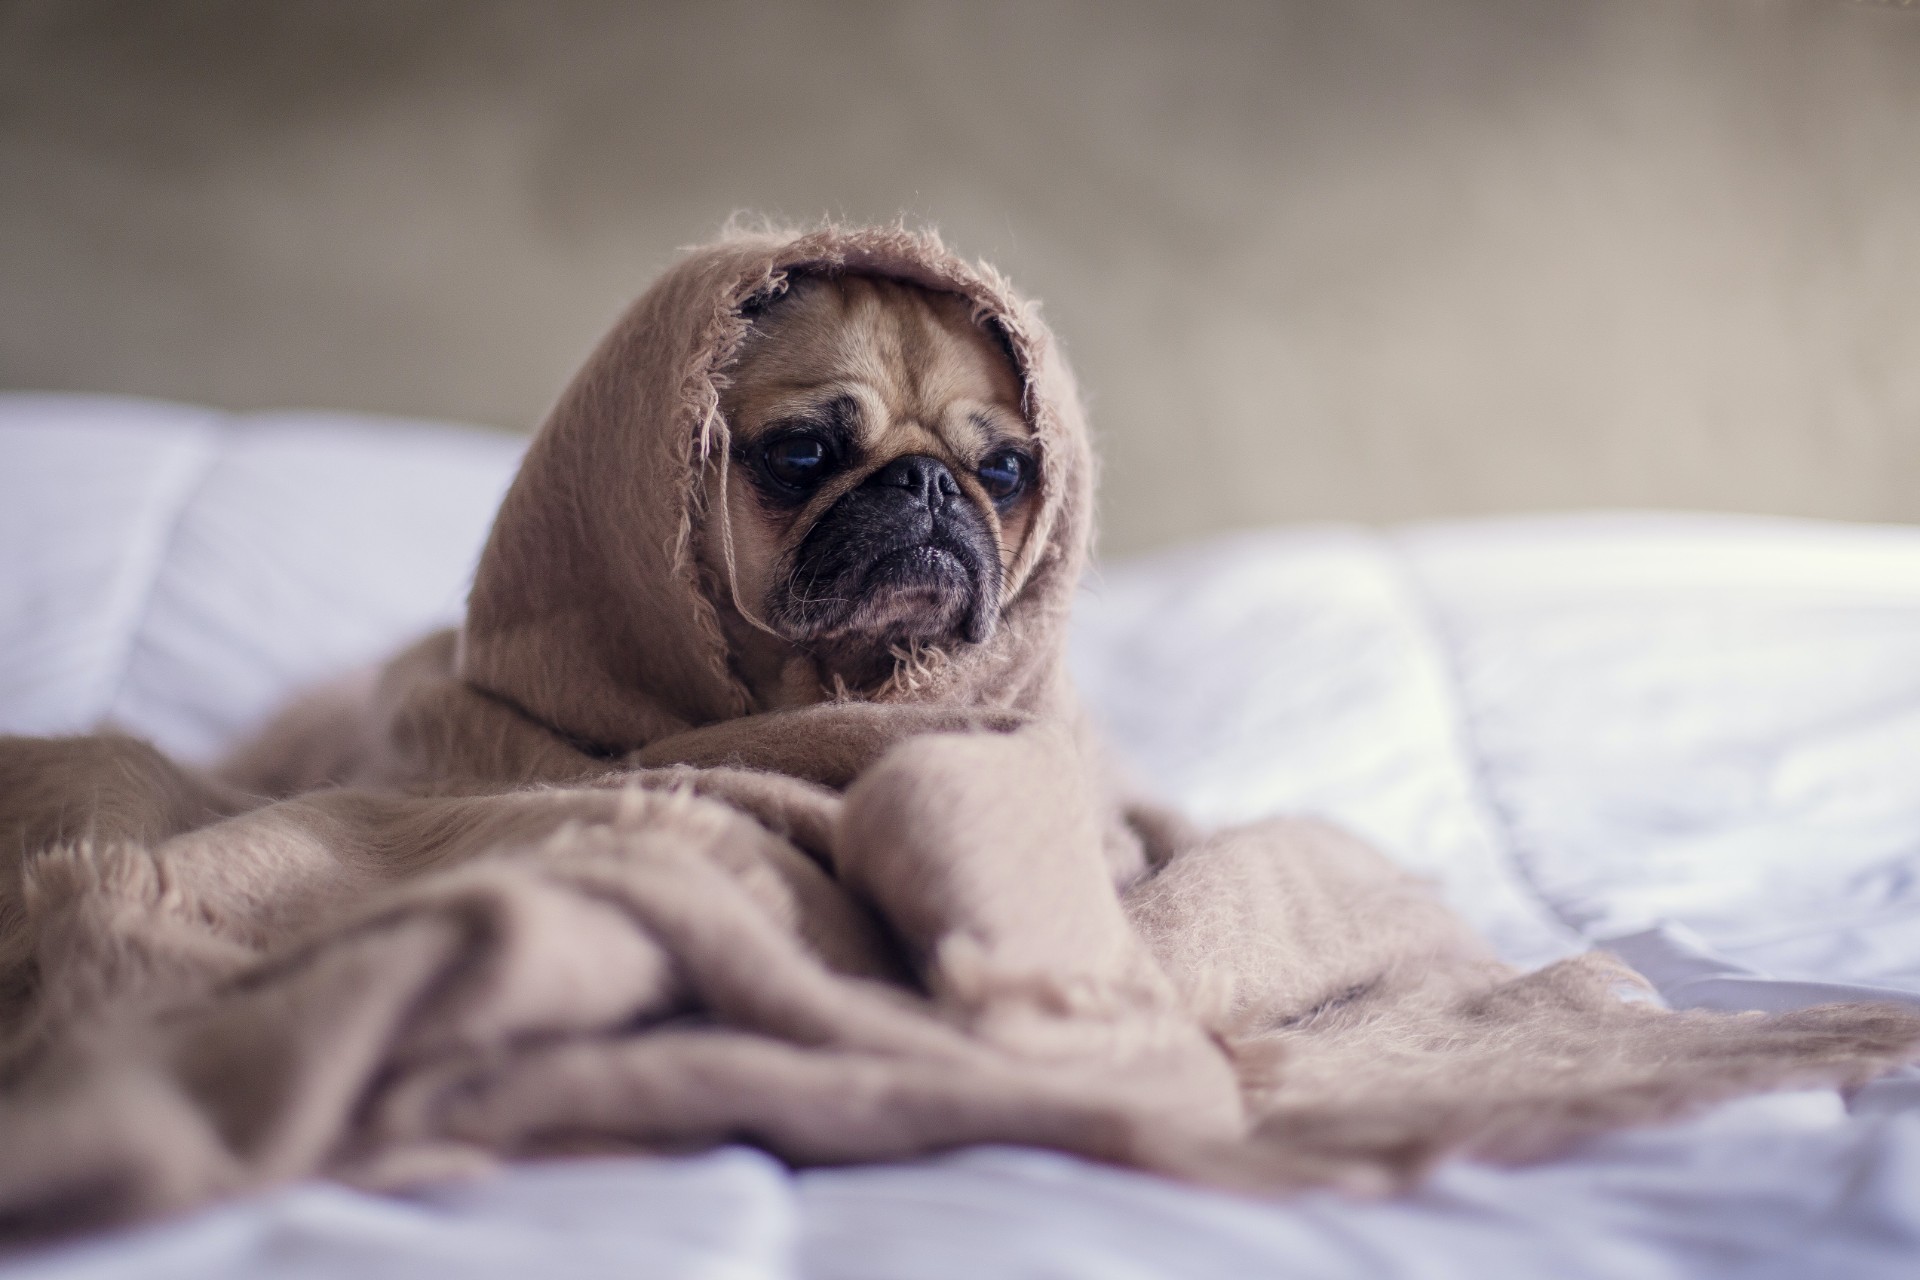 Sad pug is sad. Why? Maybe he lives in Singapore. Photo: Matthew Henry